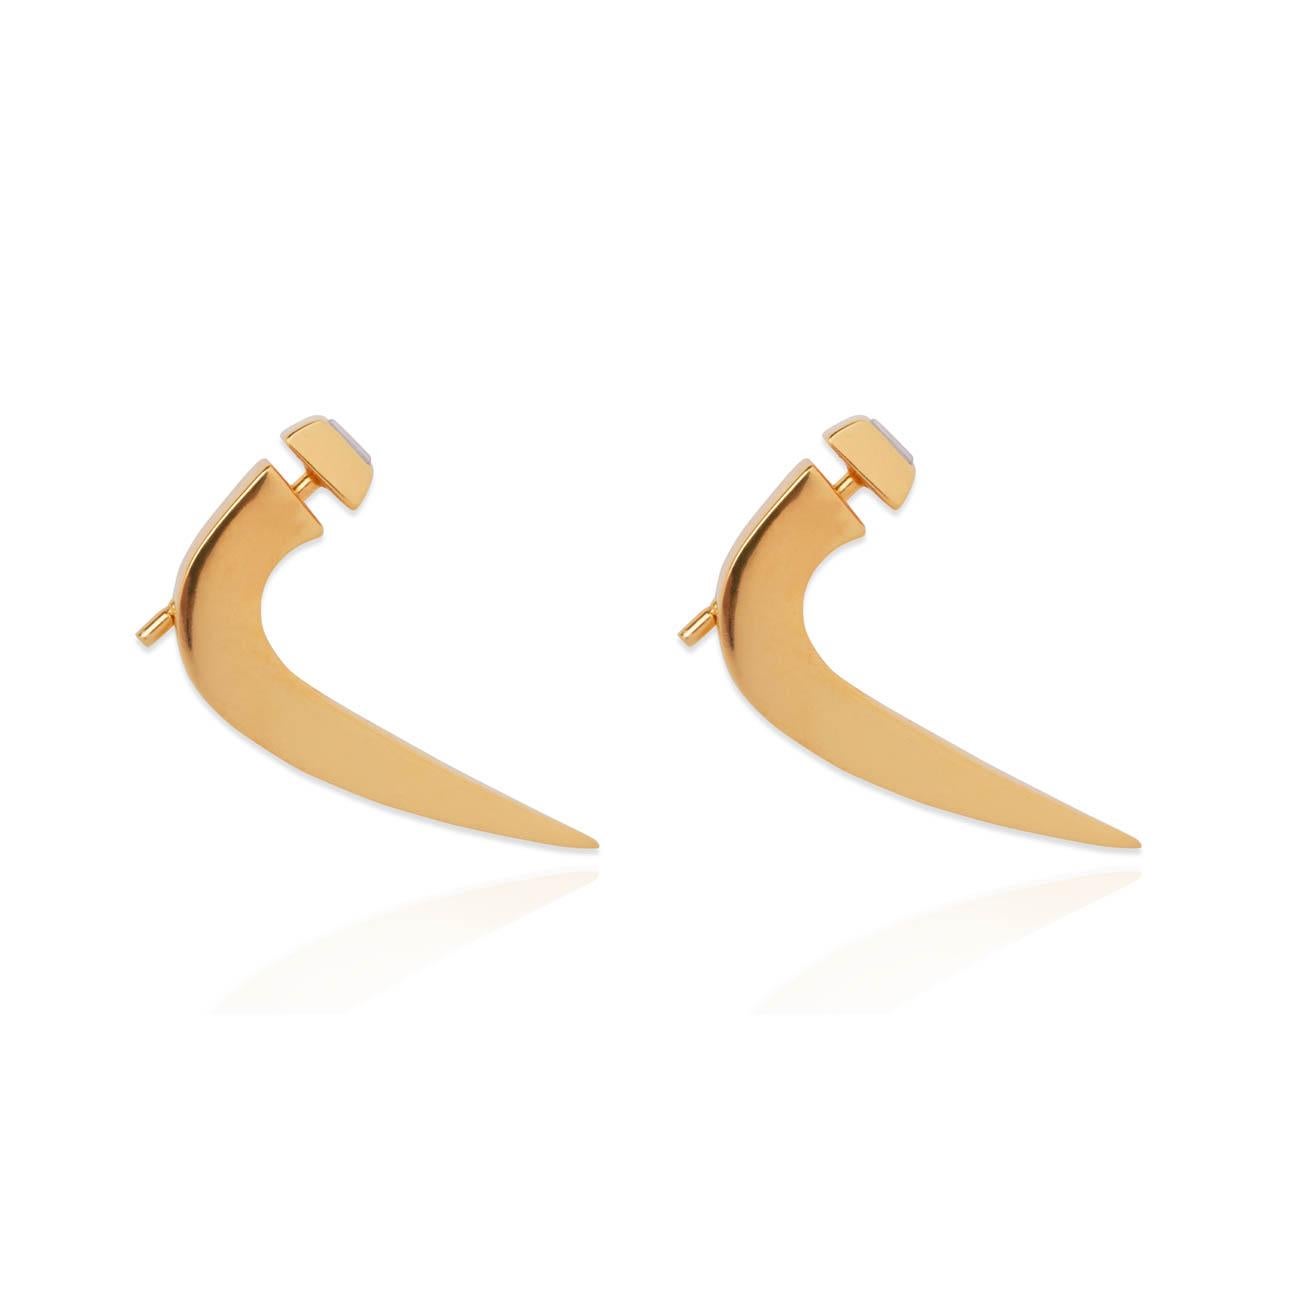 Ethno-rock unisex style earrings in 18k yellow gold vermeil, set with rainbow moonstone, a gemstone which has a meaning of enhancing mental power. The design is inspired by the shape of the horseshoe nails and the horned-body ornaments popular in